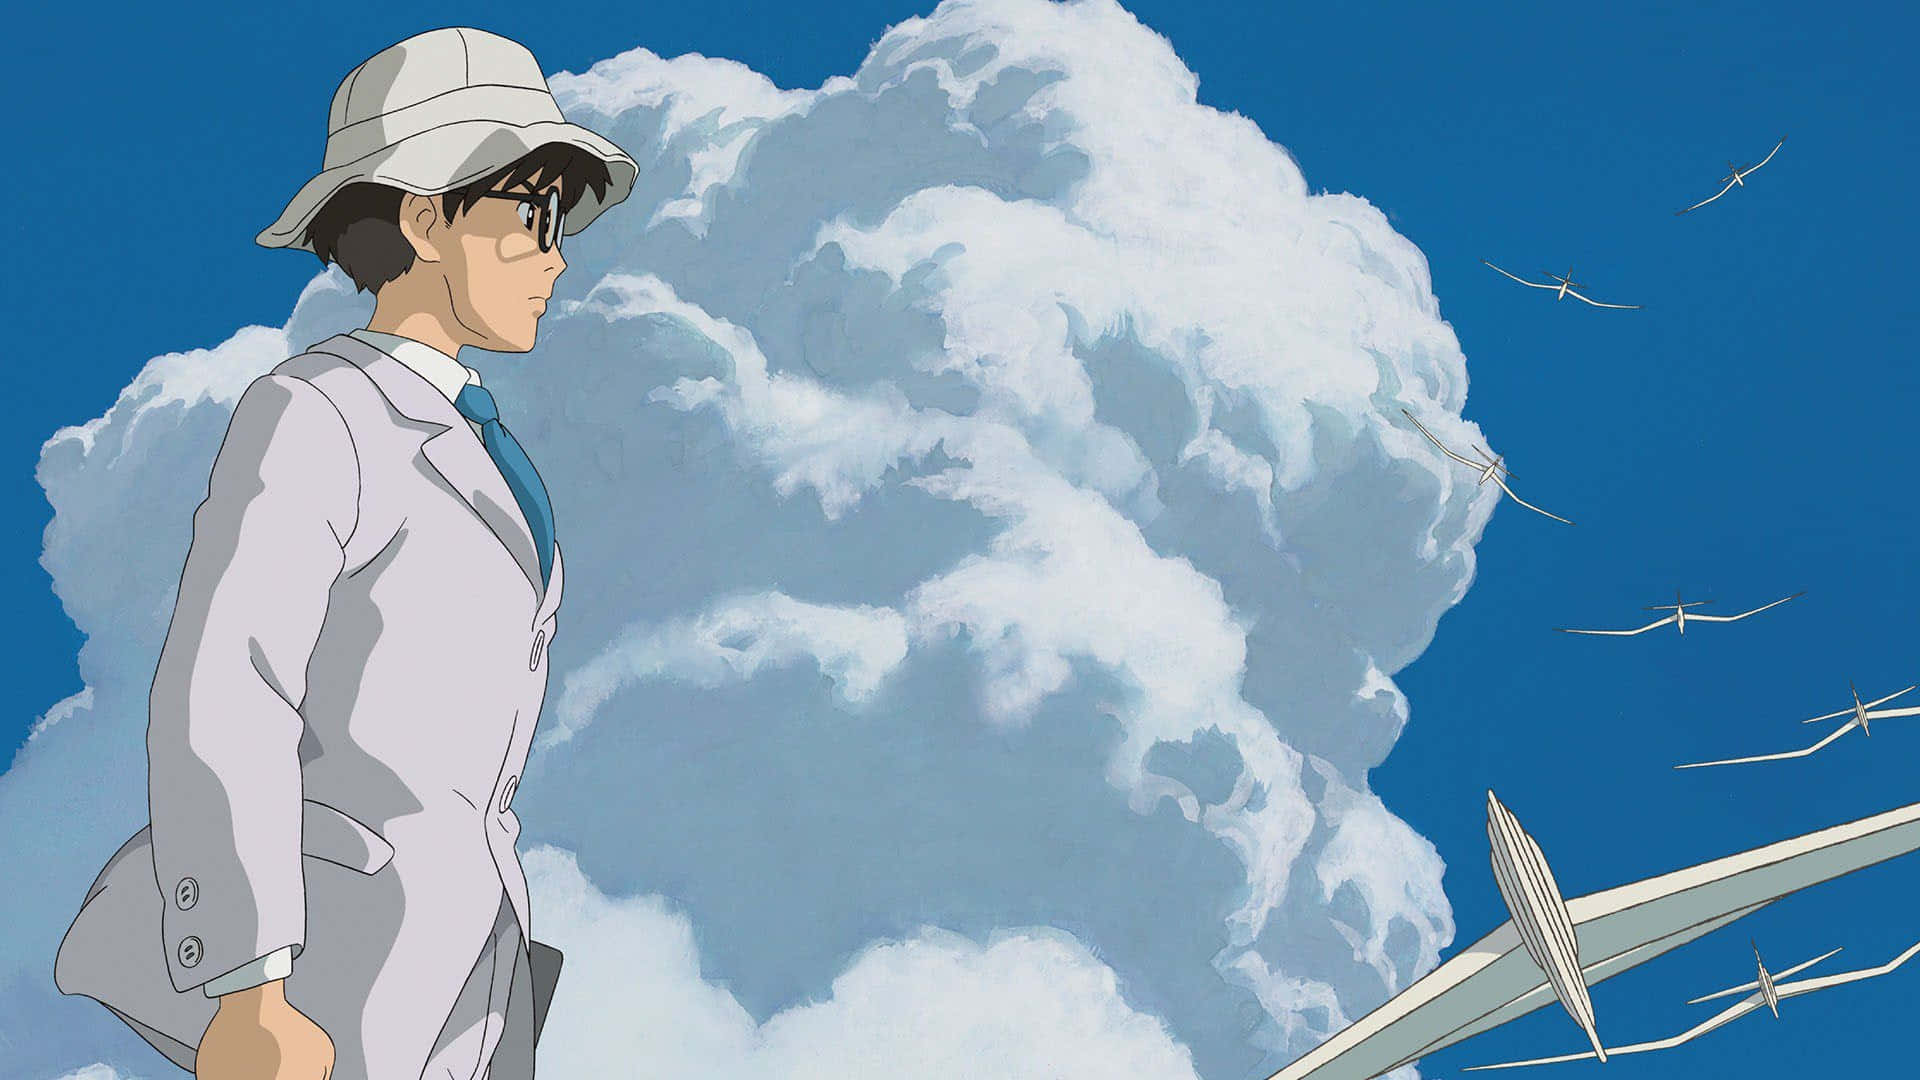 A journey of self-discovery, "The Wind Rises" captures the incredible beauty of life Wallpaper